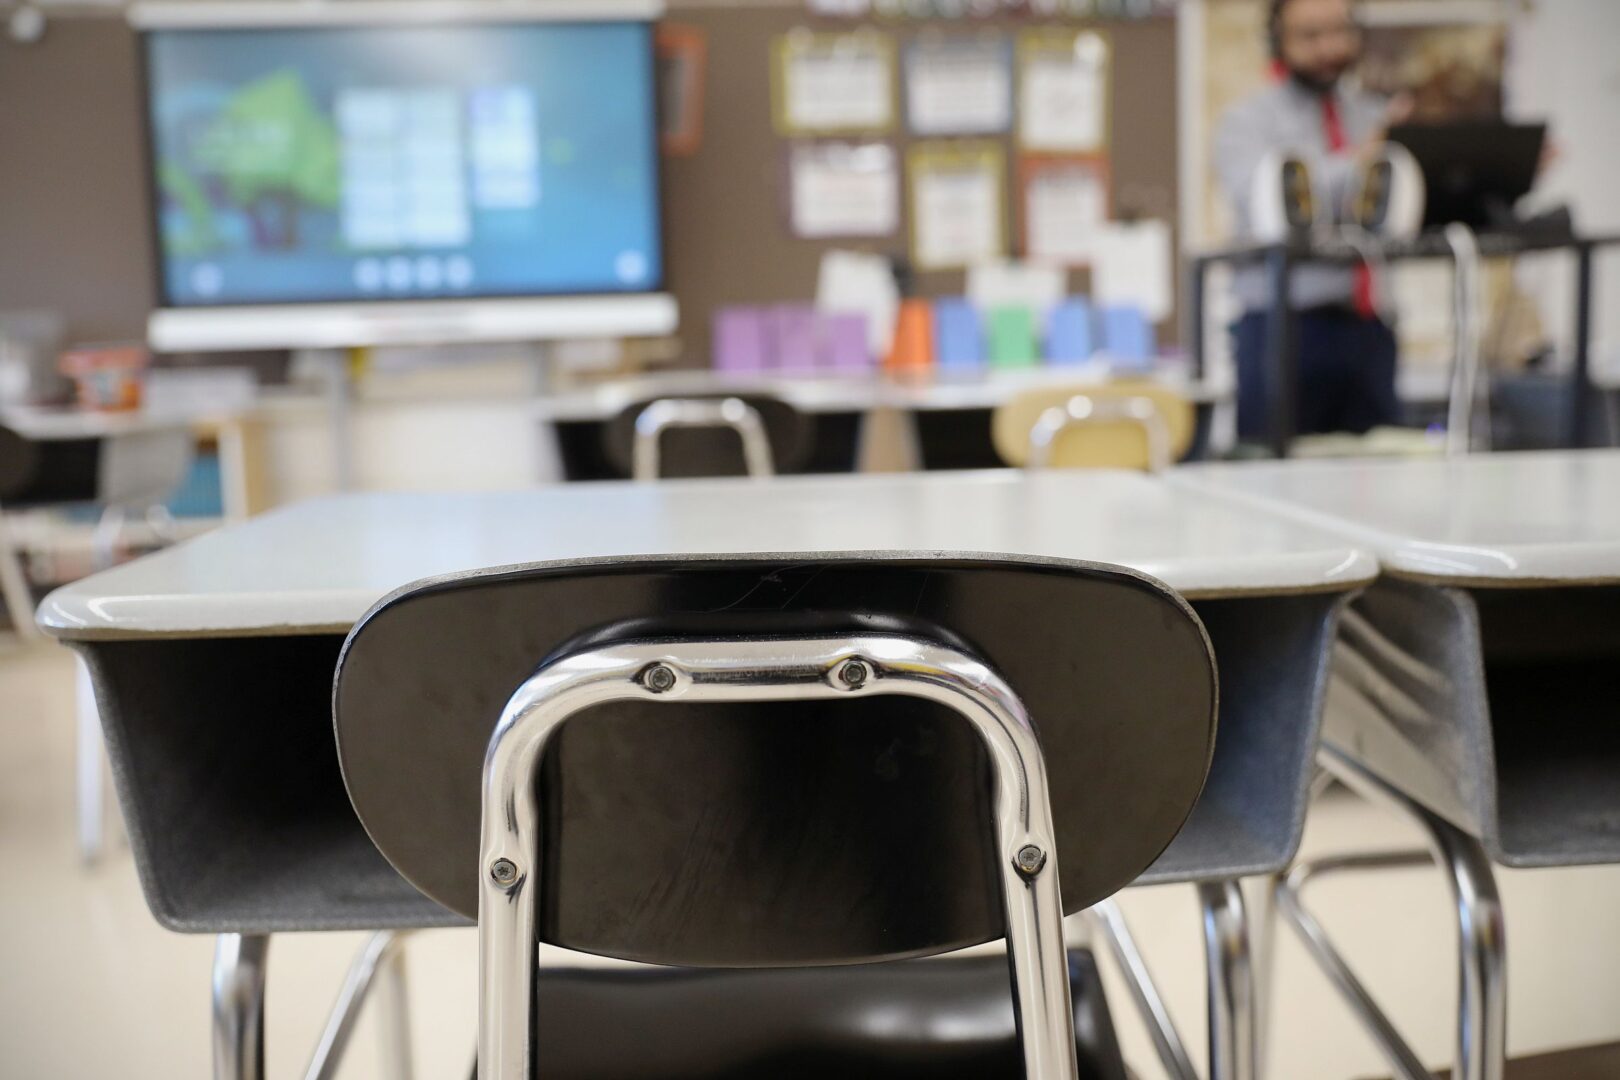 Desks and chairs sit empty in a classroom at Loring Flemming Elementary School in Blackwood, New Jersey.